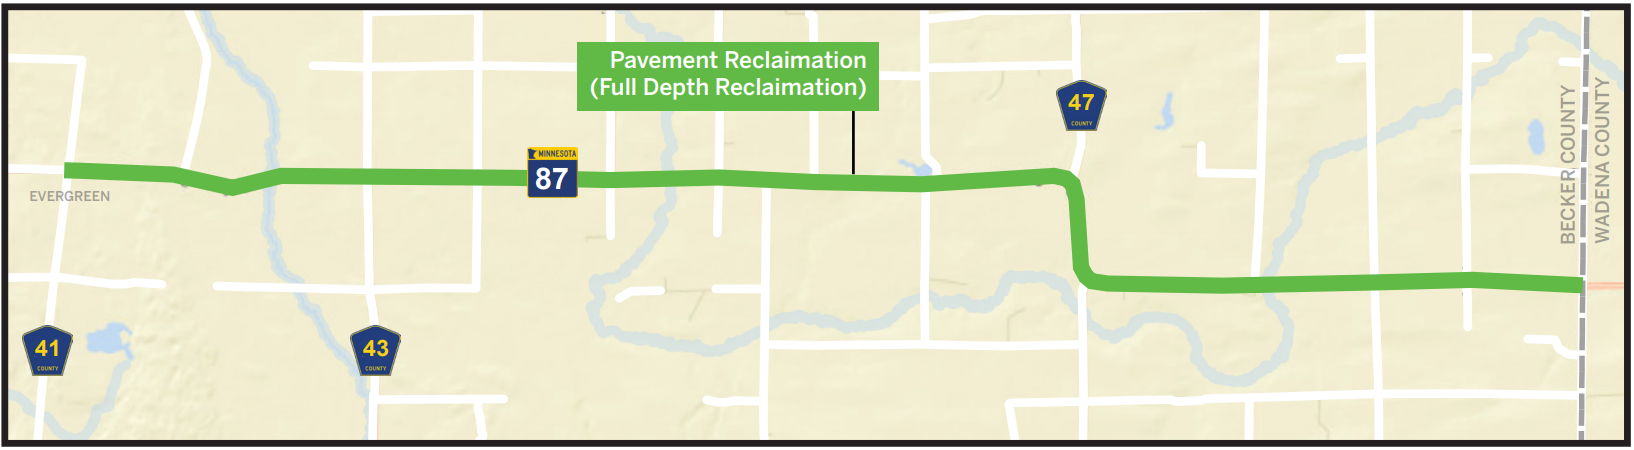 Project map for pavement resurfacing from Evergreen to the Becker/Wadena county line